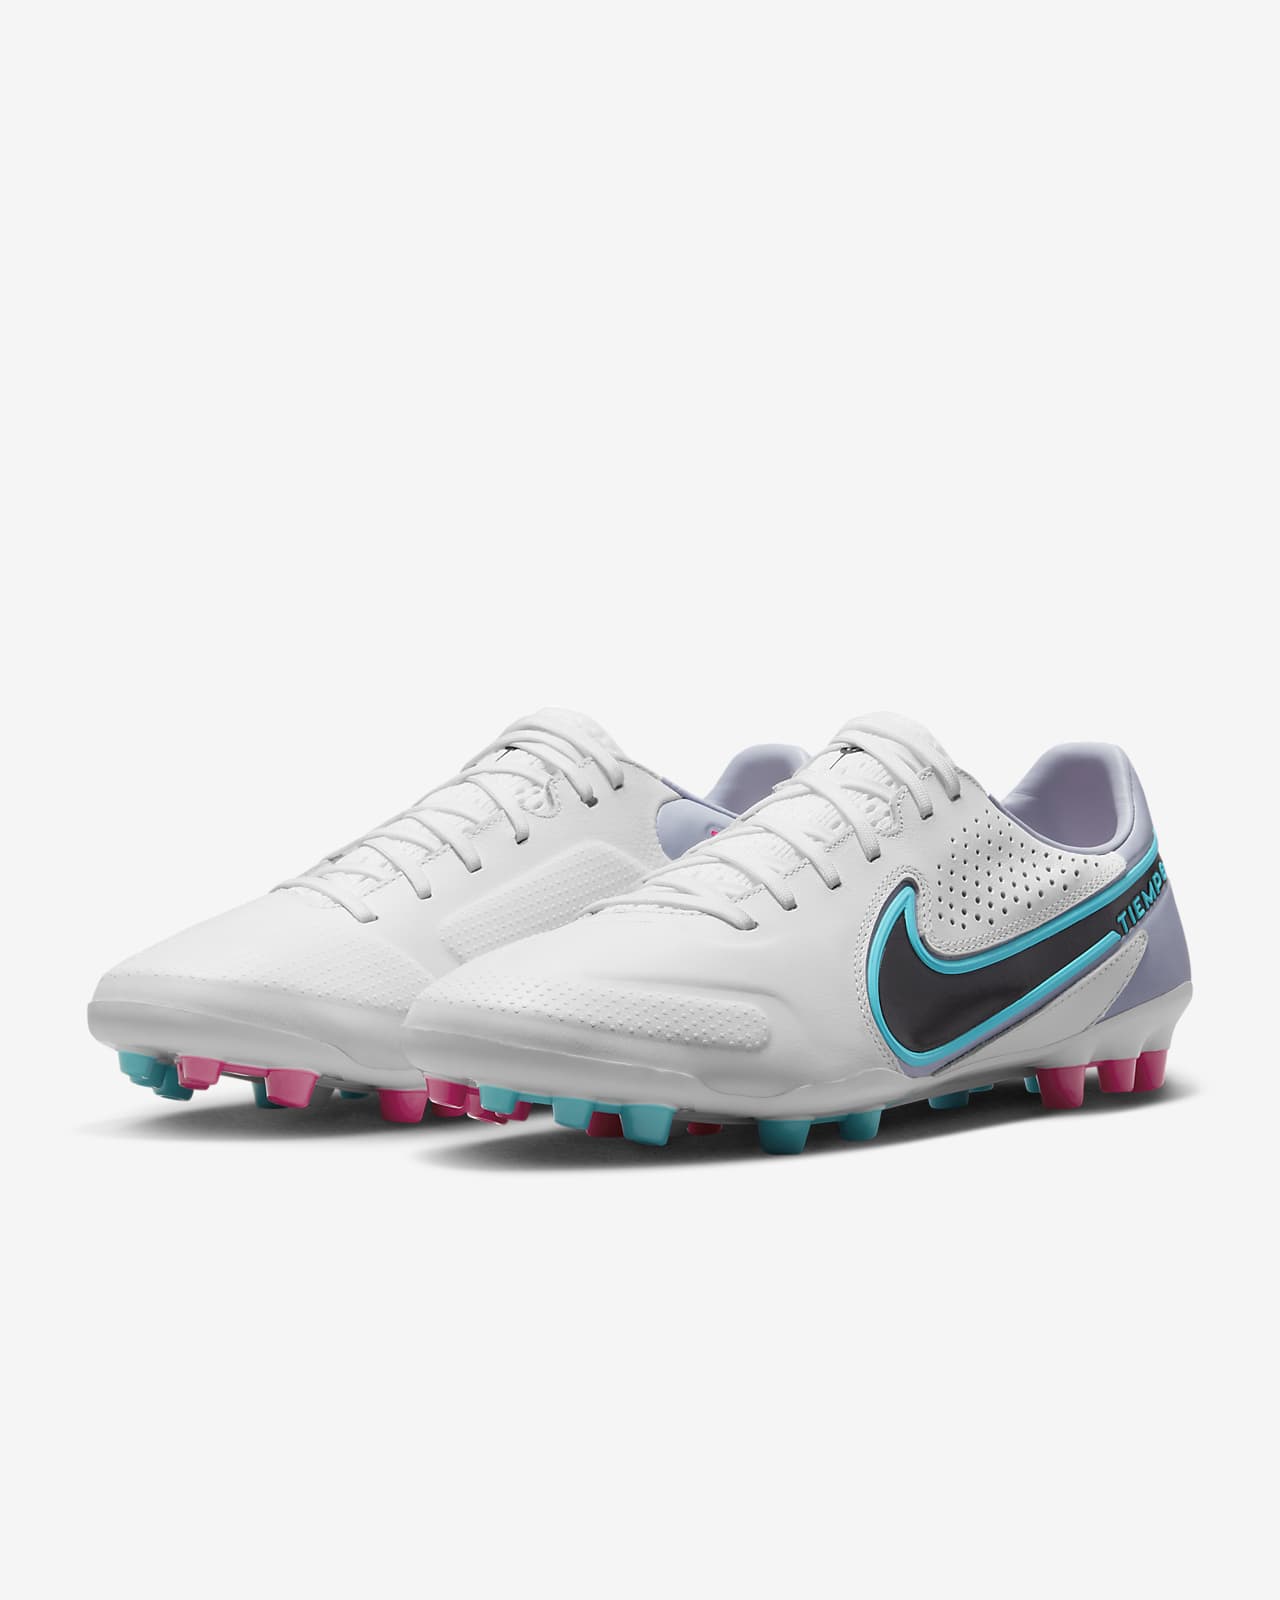 Nike Tiempo Legend 9 Pro AG-Pro Artificial-Ground Boot. Nike GB